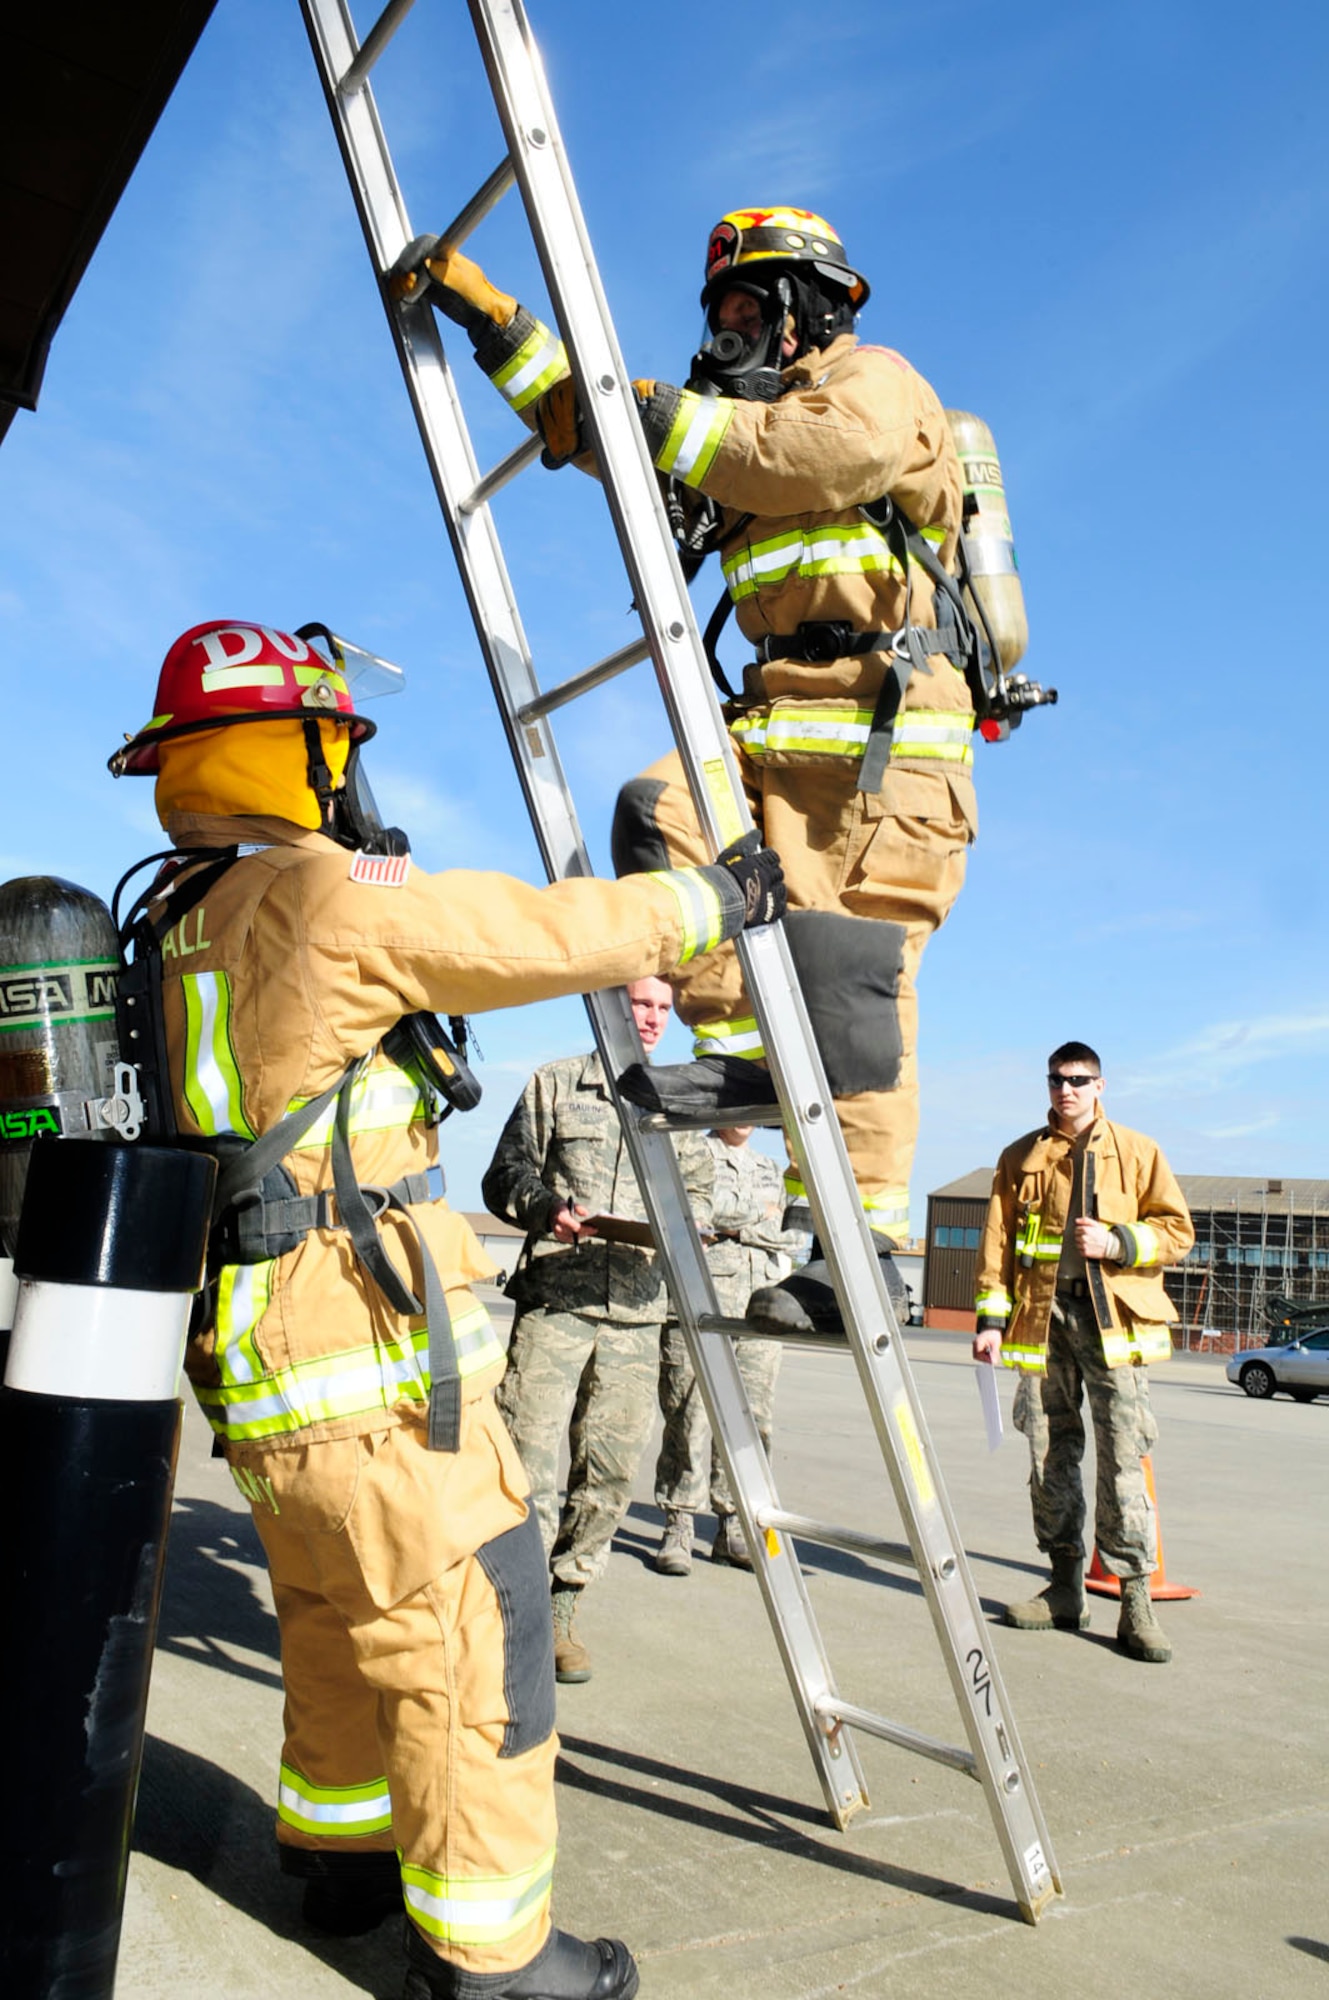 Watch Manager Adrian Delaney, left, 100th Civil Engineer Squadron Fire Department firefighter from Elmswell, Suffolk, holds a ladder as Firefighter Jason French, 100th CES Fire Department from Lakenheath, Suffolk, climbs during self-contained breathing apparatus training April 14, 2014, on RAF Mildenhall, England. Throughout April, firefighters here are undergoing annual training on respiratory protection and working in pairs through a course of six stations including a dummy drag, litter carry and hose hoist. The training is designed to determine the amount of air consumption by each firefighter, to work out how long a tank of oxygen would last them in a fire. (U.S. Air Force photo by Karen Abeyasekere/Released)